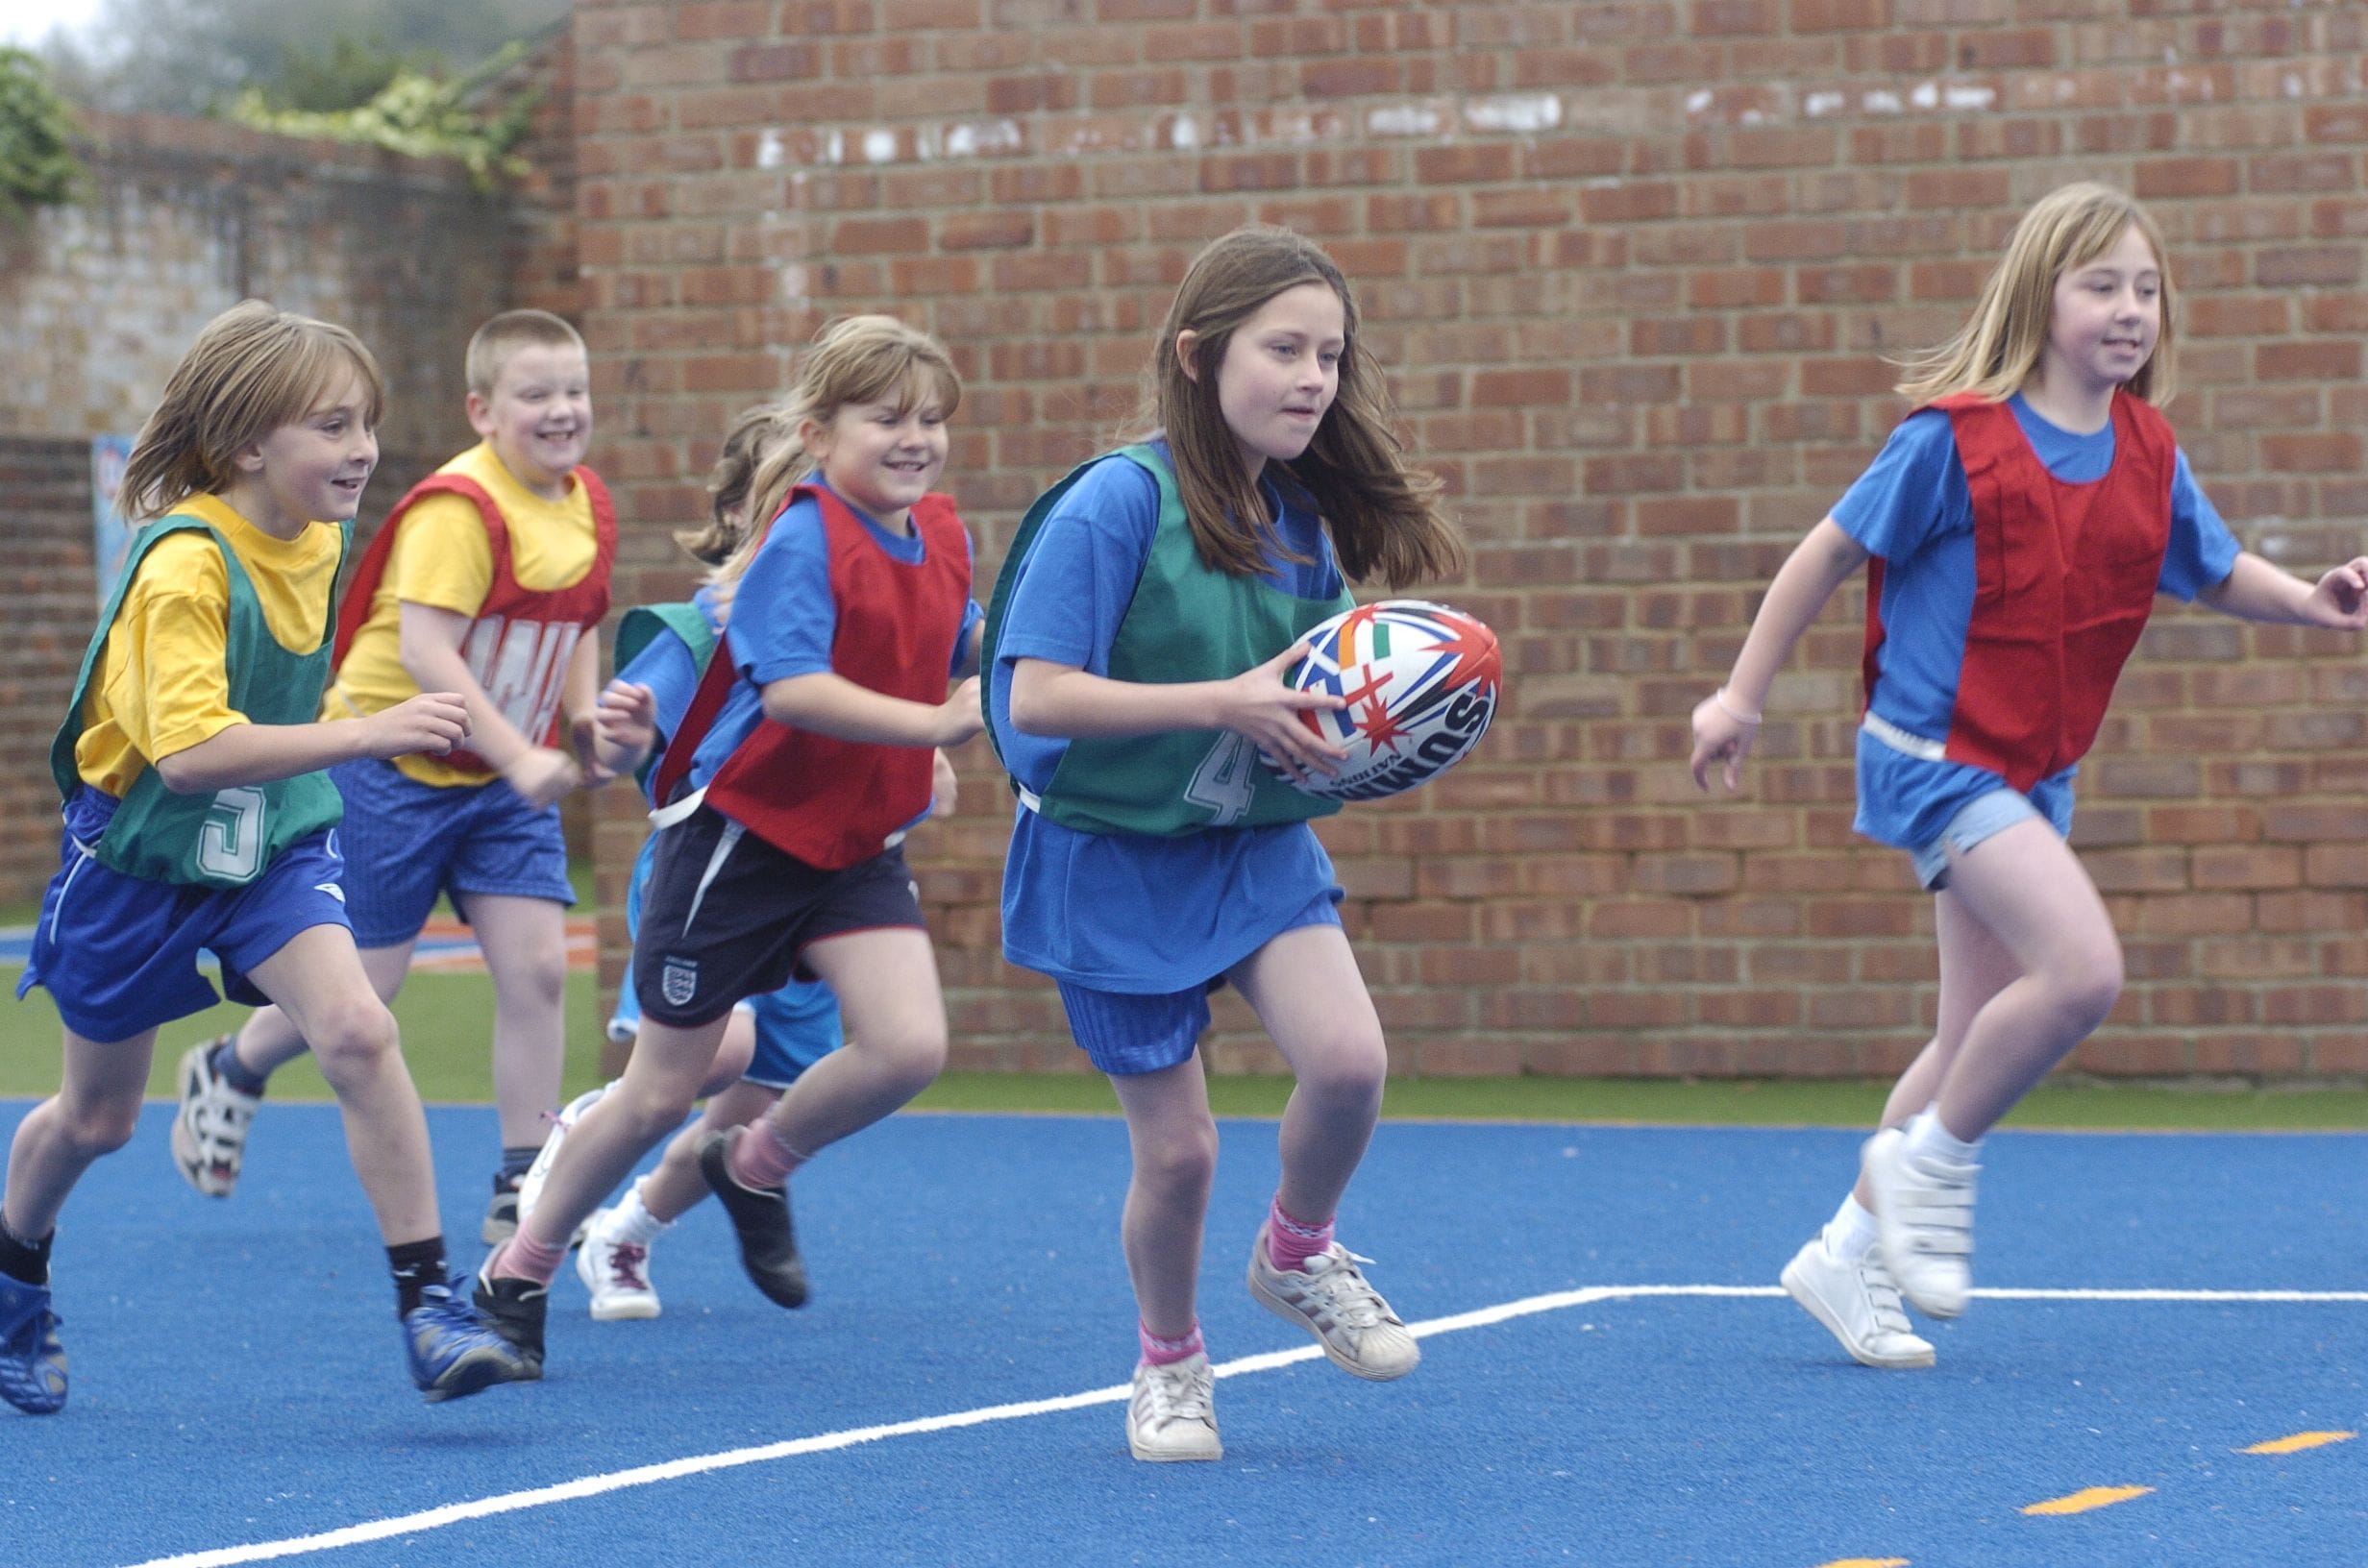 children playing rugby on artificial grass pitch